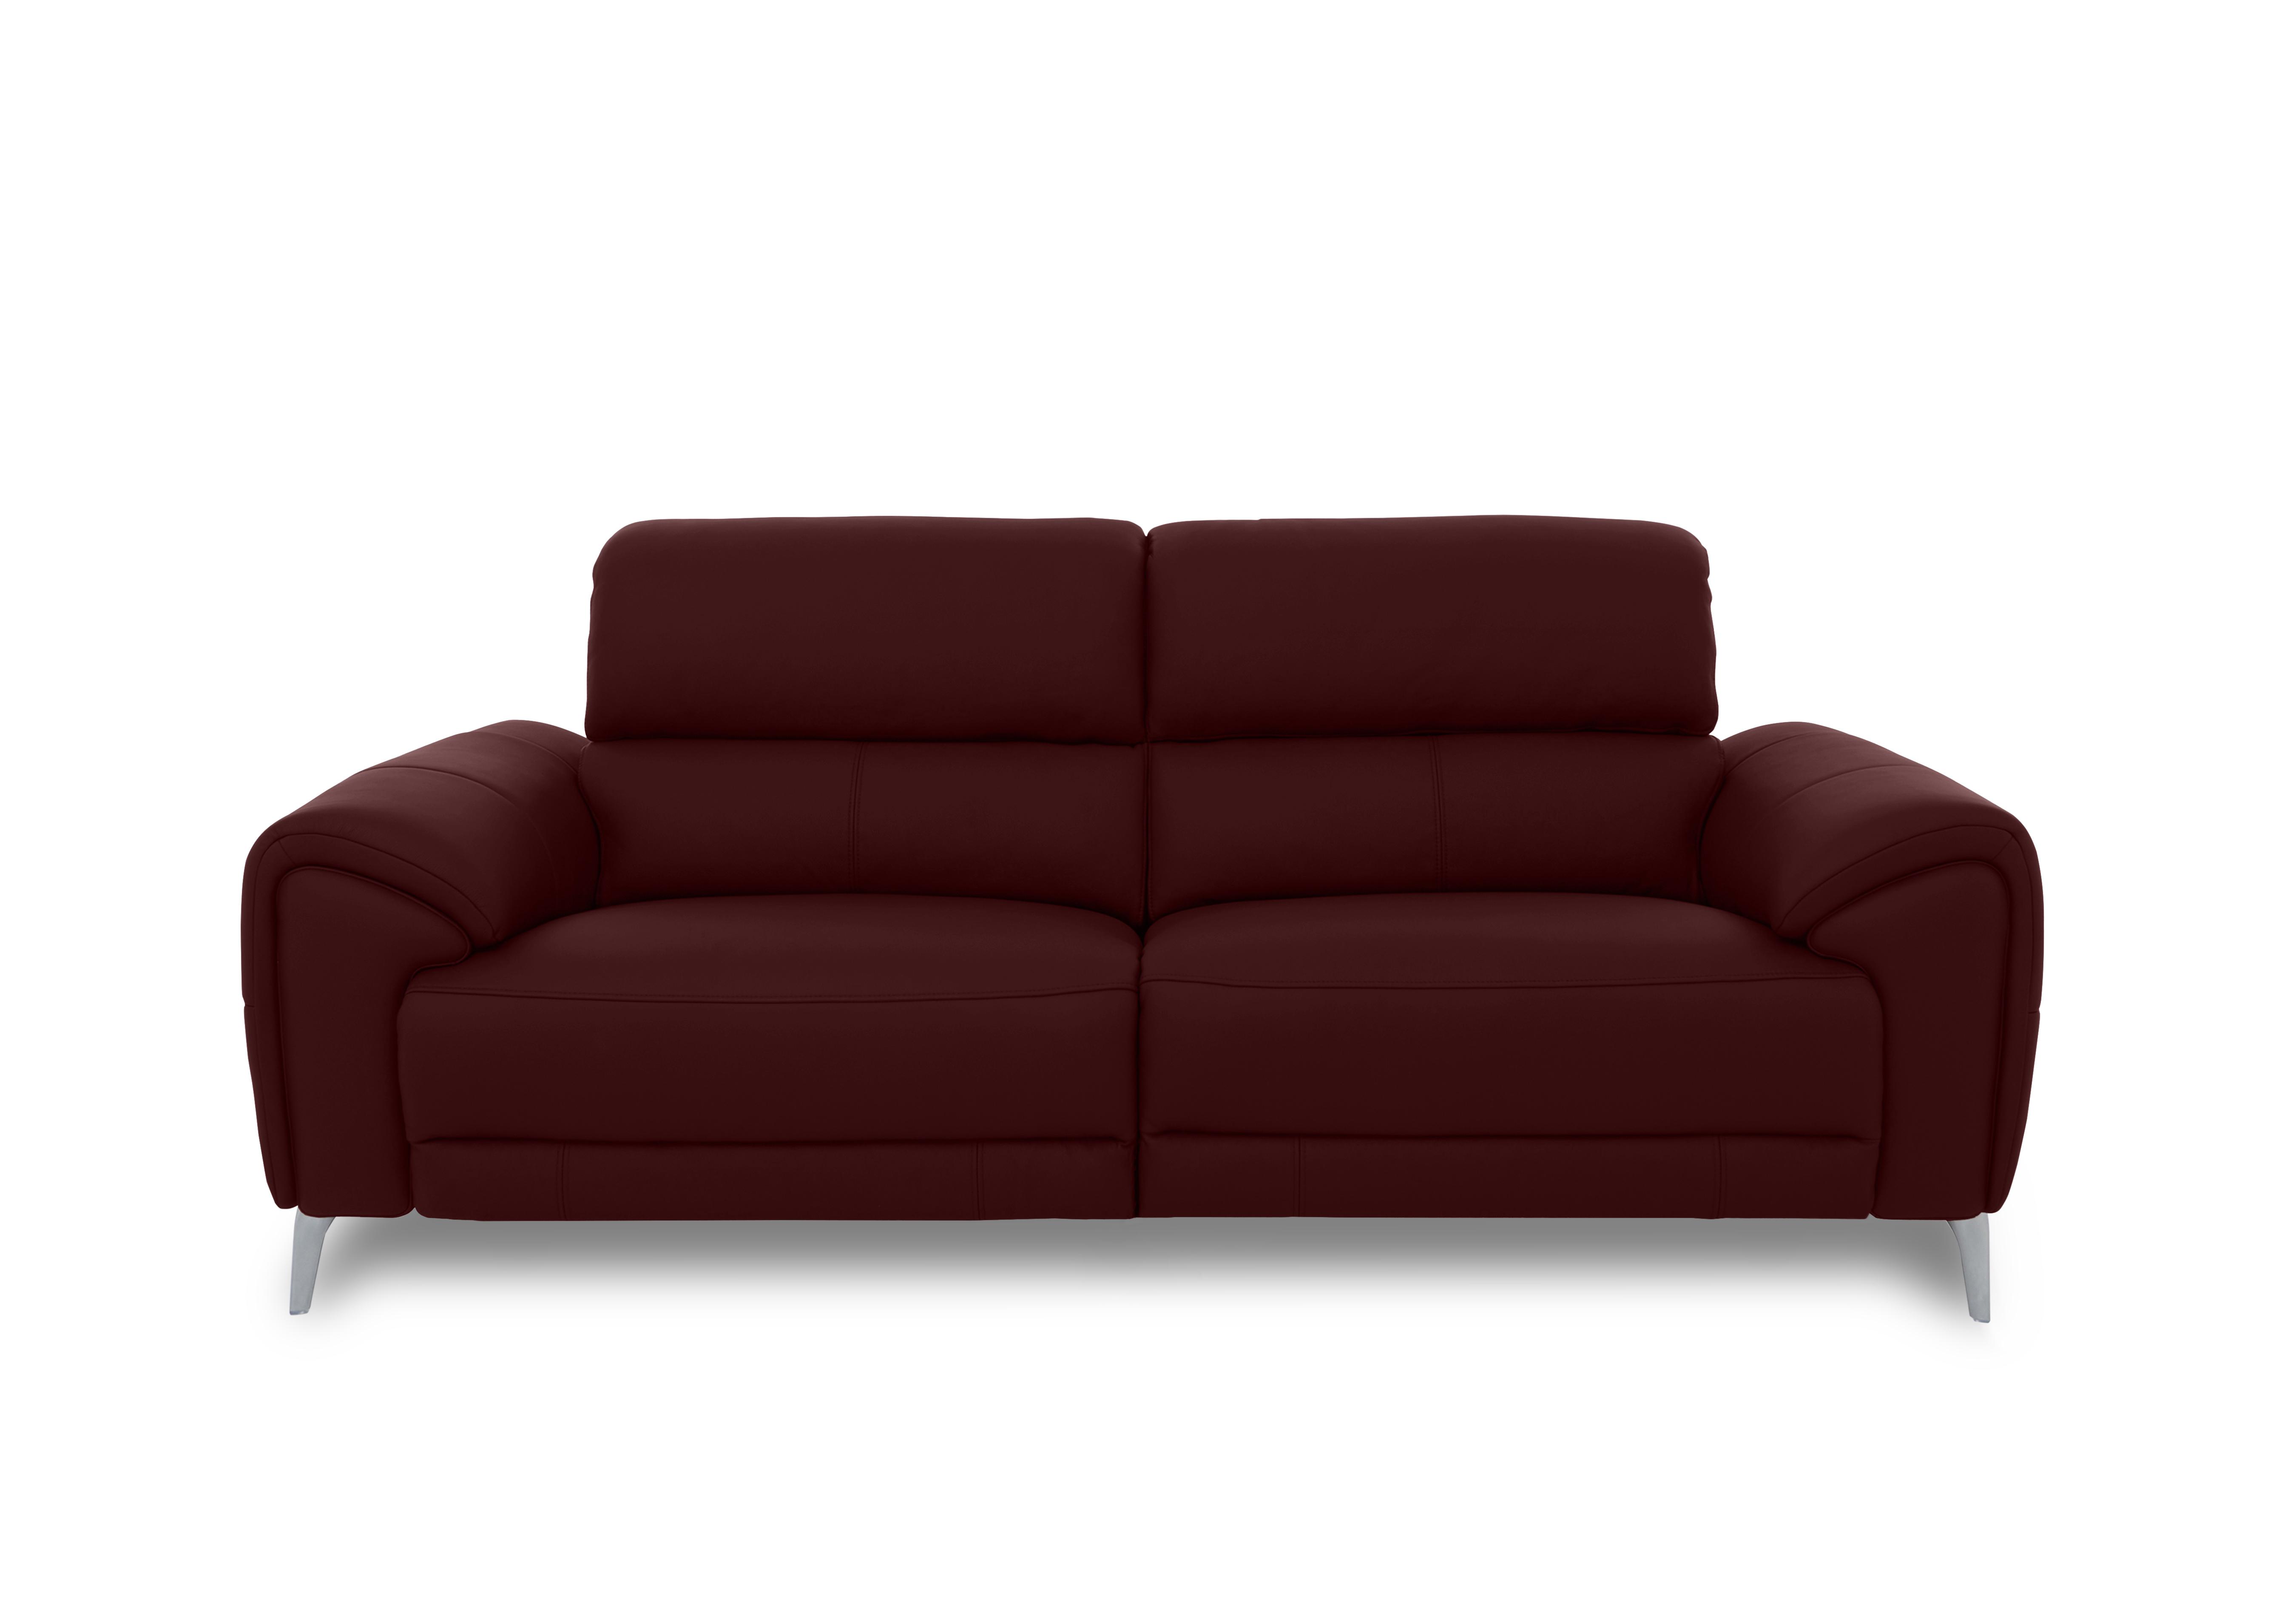 Vino Leather 3 Seater Power Recliner Sofa with Power Headrests and Heated Seats in Cat-60/15 Ruby on Furniture Village